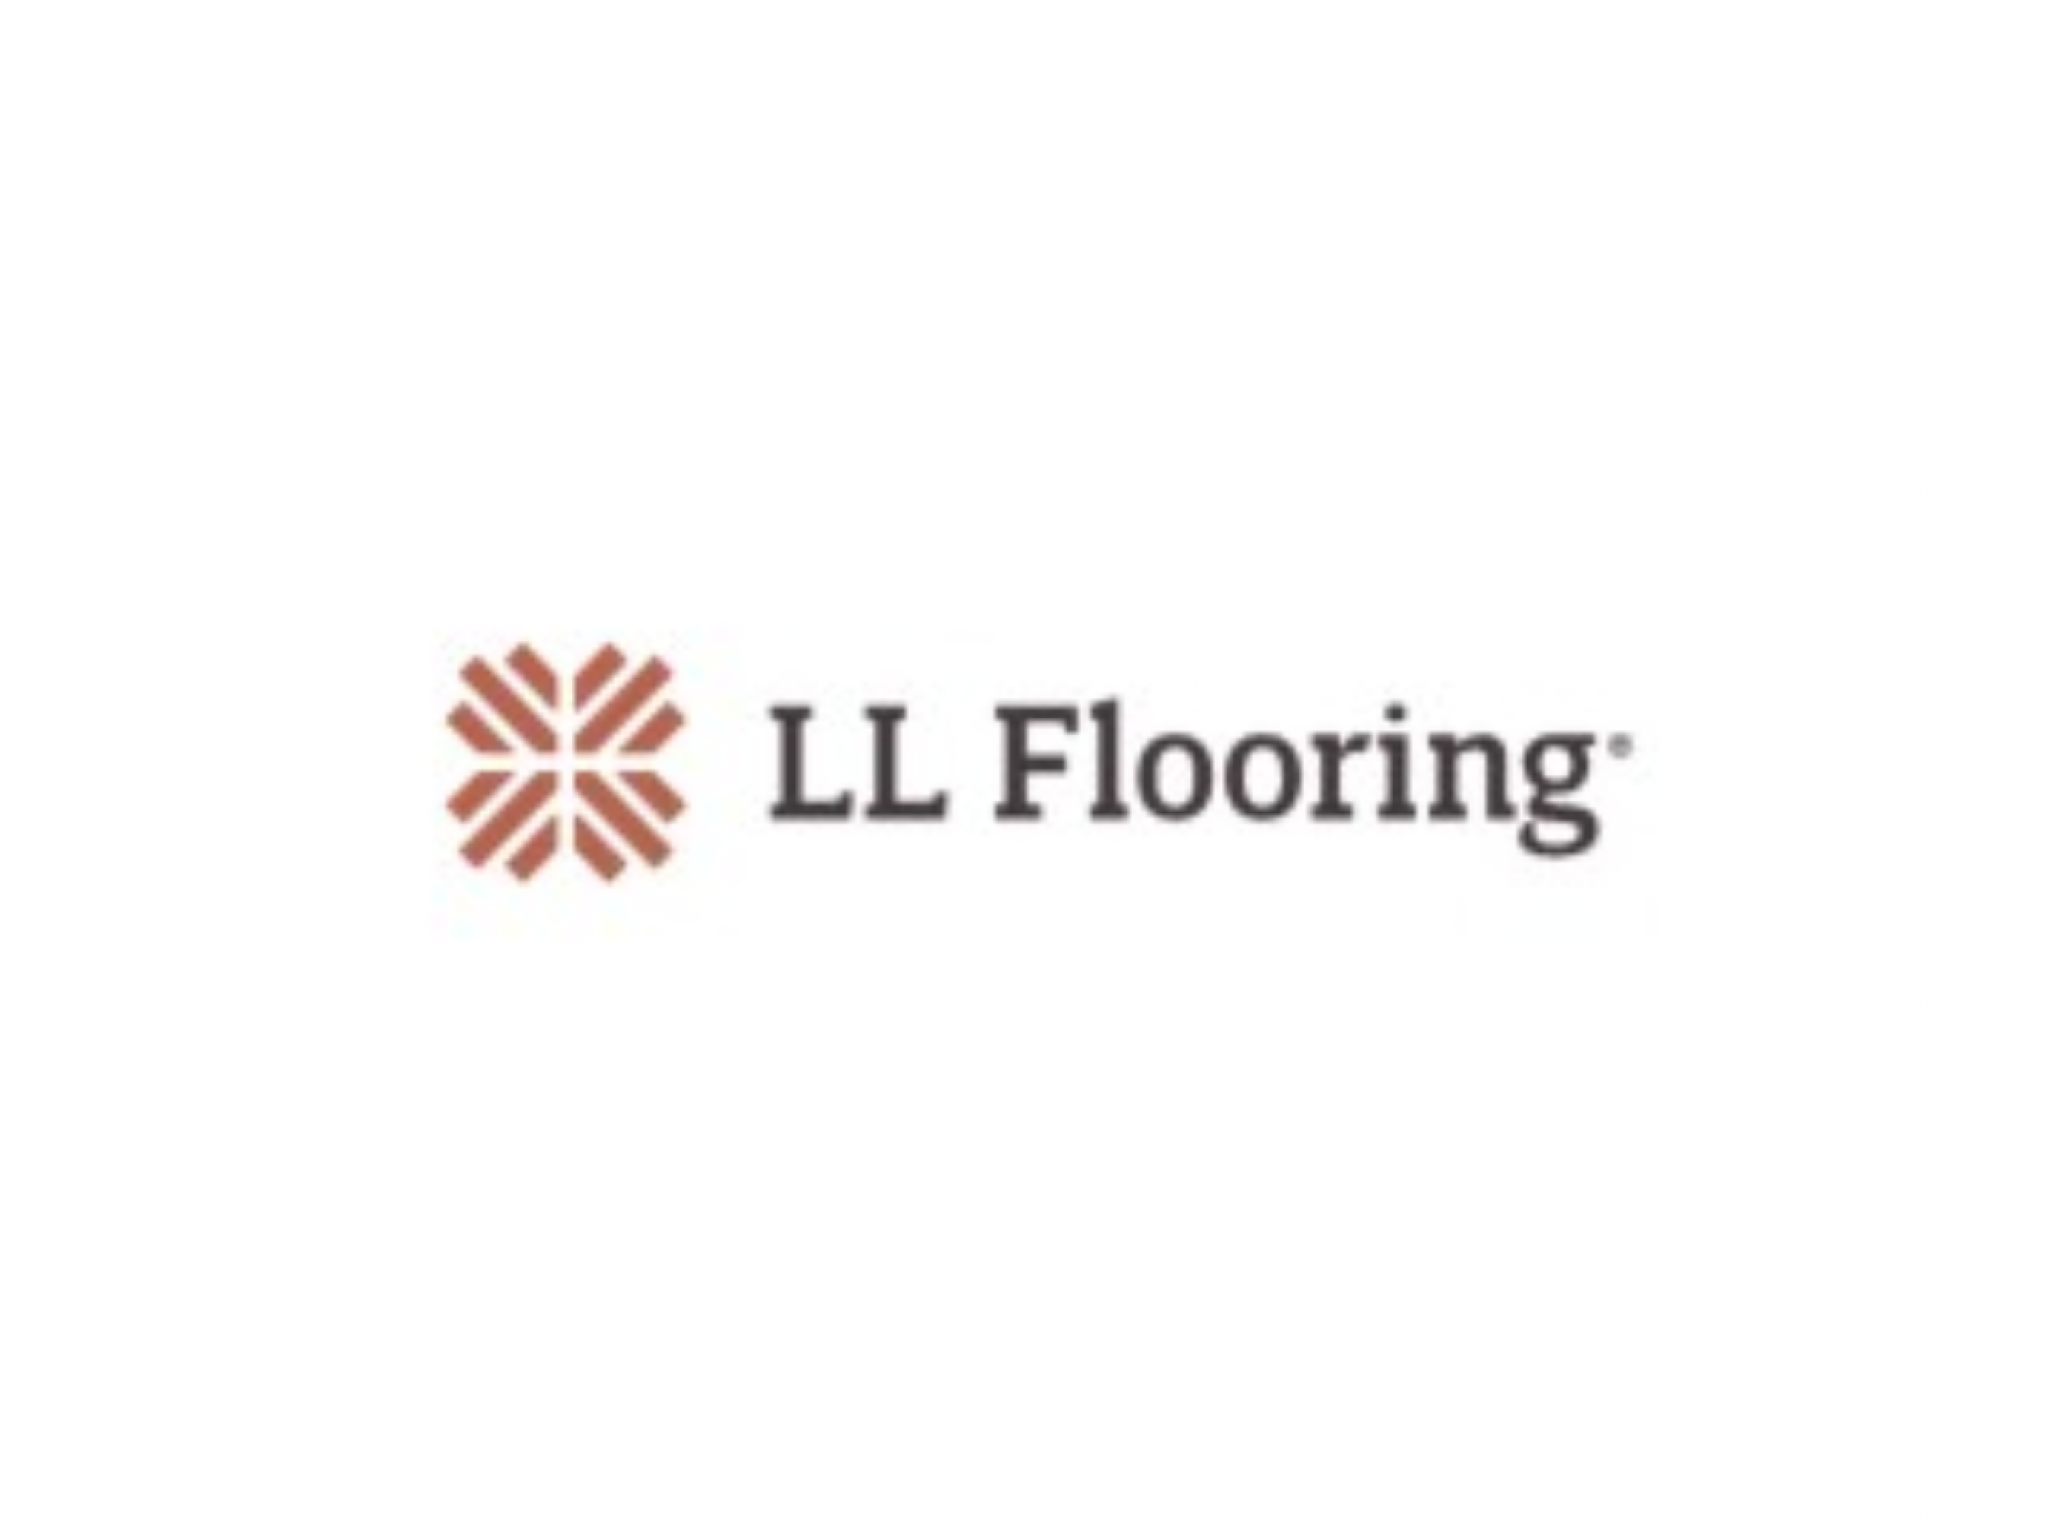  hard-surface-flooring-retailer-ll-floorings-shares-are-ticking-higher-whats-going-on 